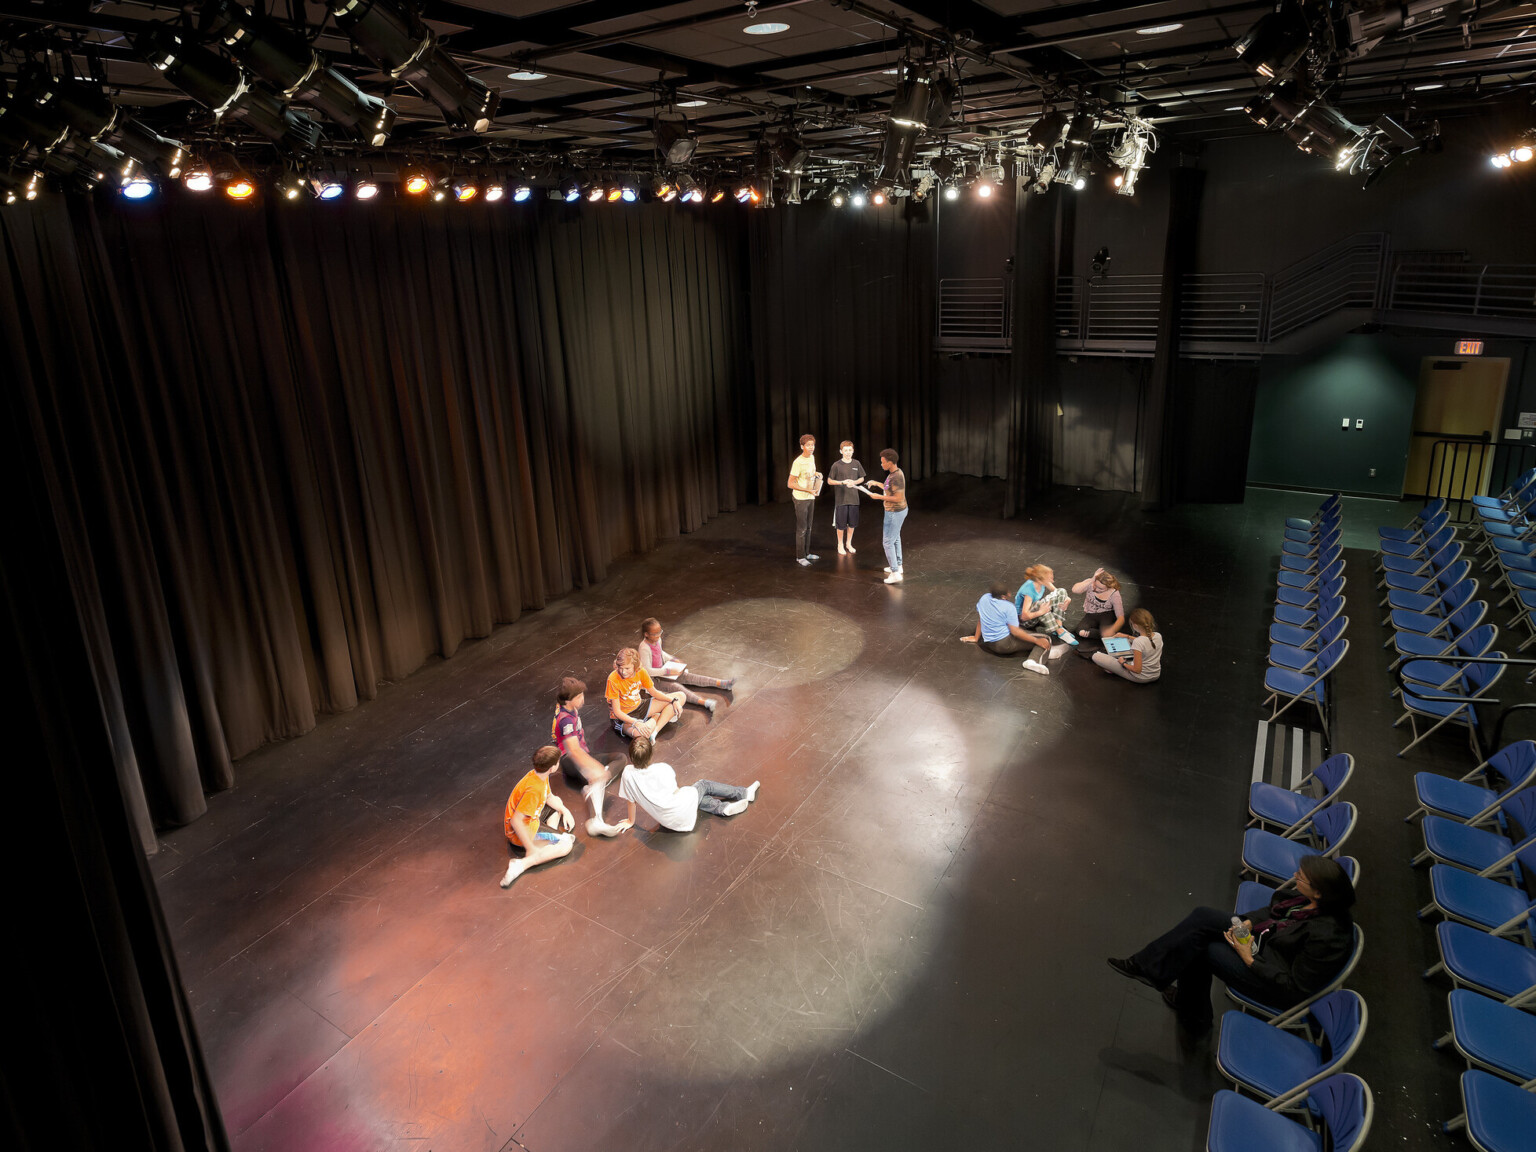 Stage for student's performance with actors, spotlights, rigging gear, audience seating